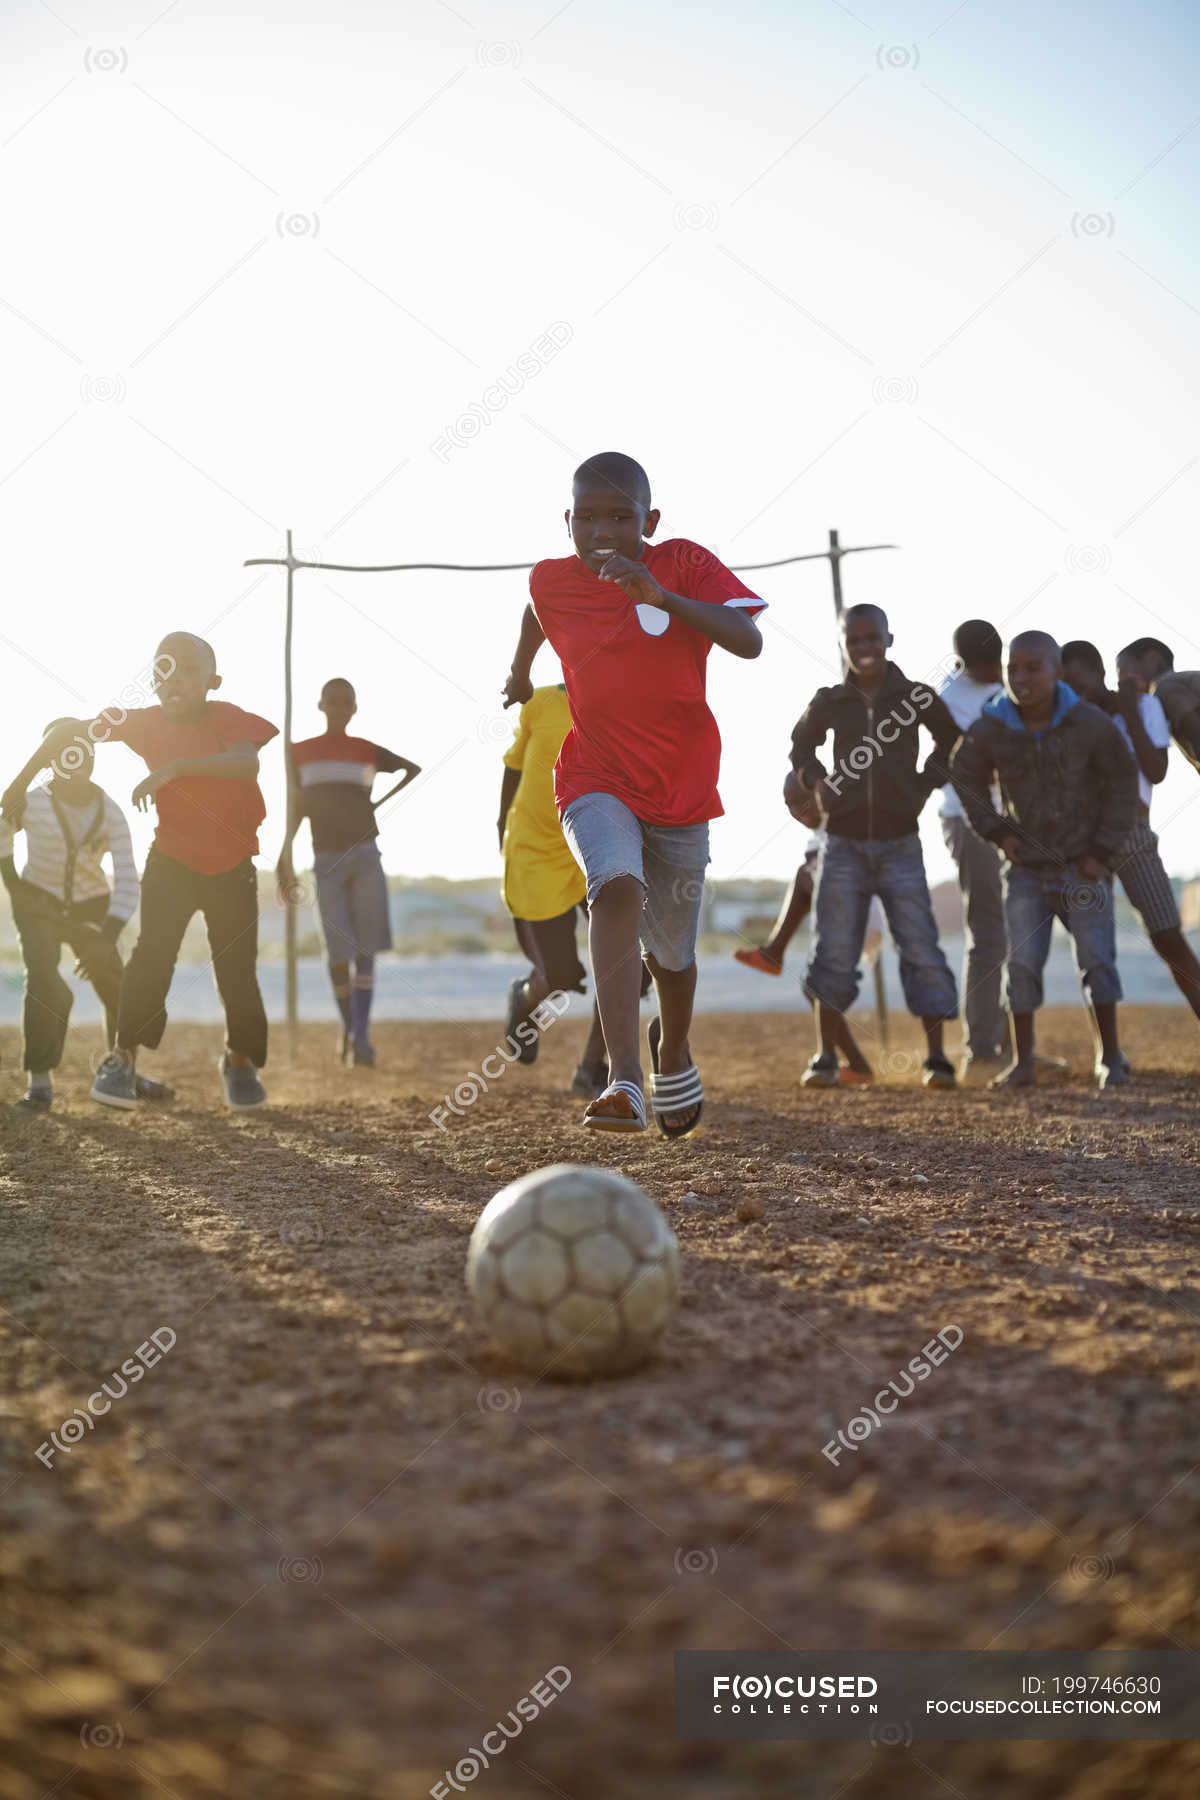 African boys playing soccer together in dirt field — space - Stock Photo | #199746630